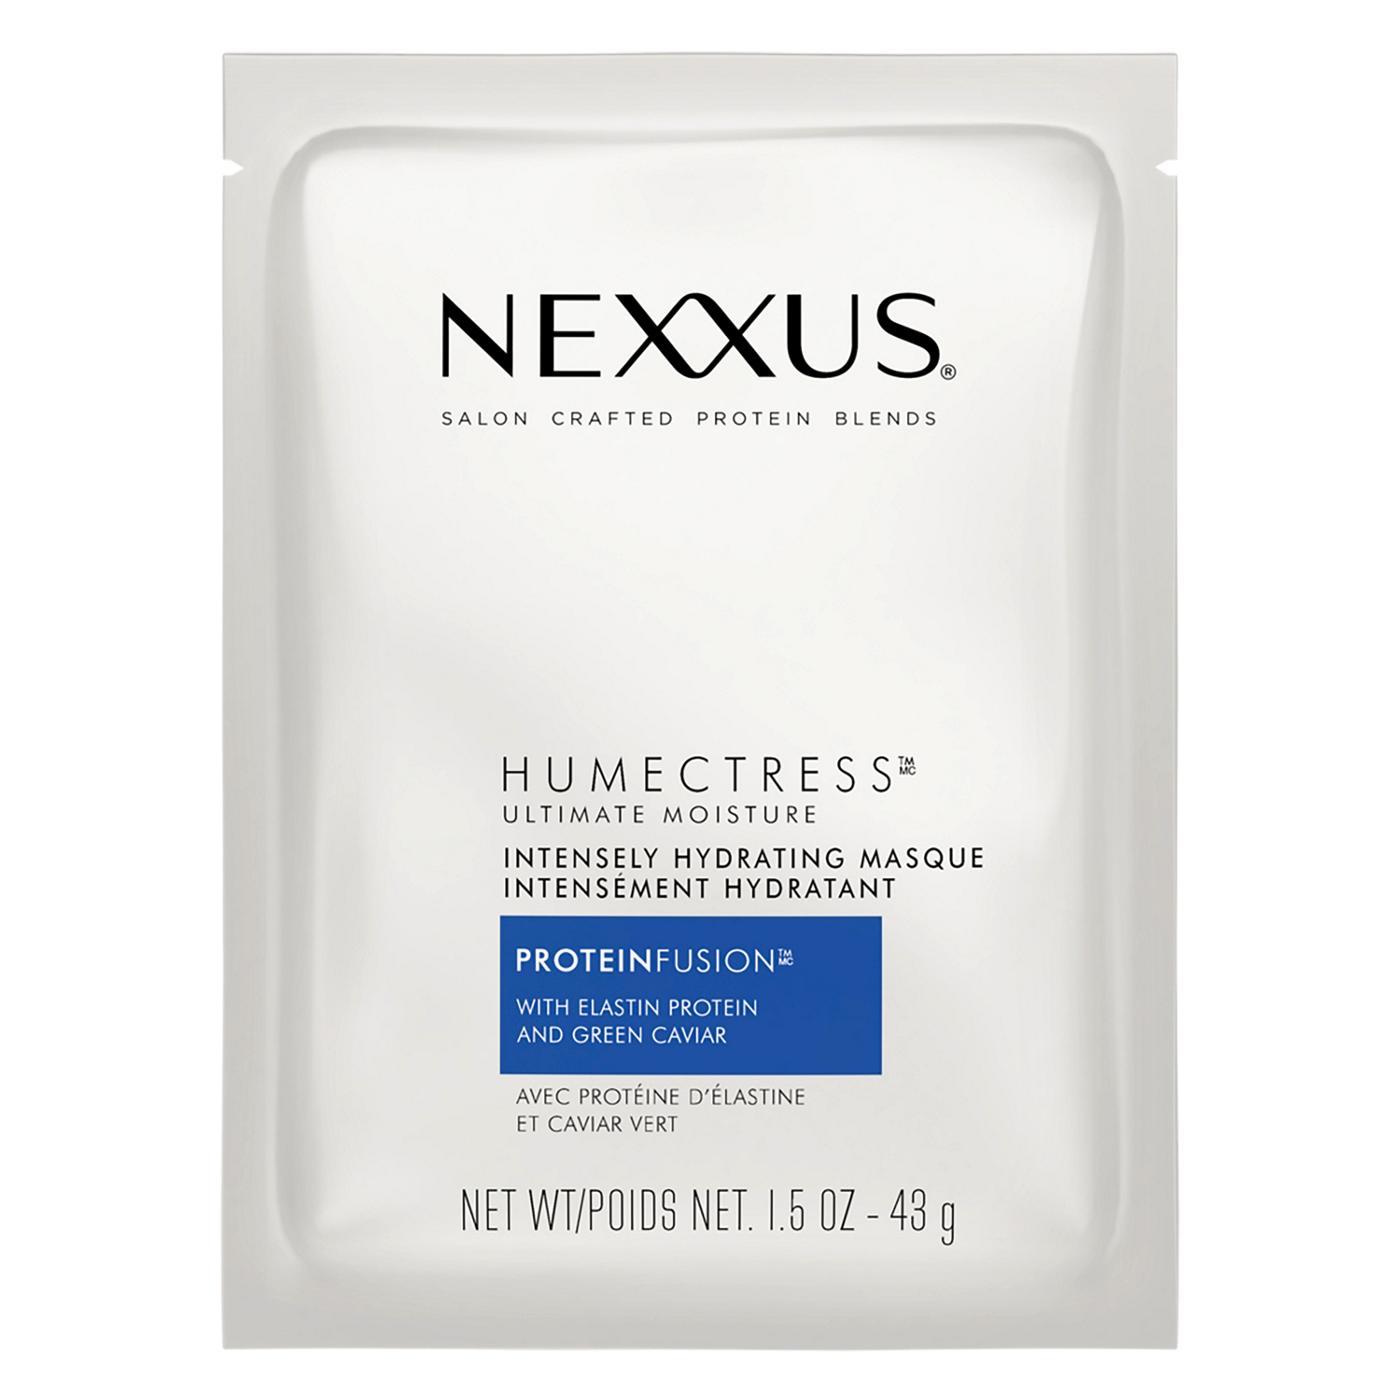 Nexxus Humectress for Normal to Dry Hair Moisture Masque; image 1 of 10